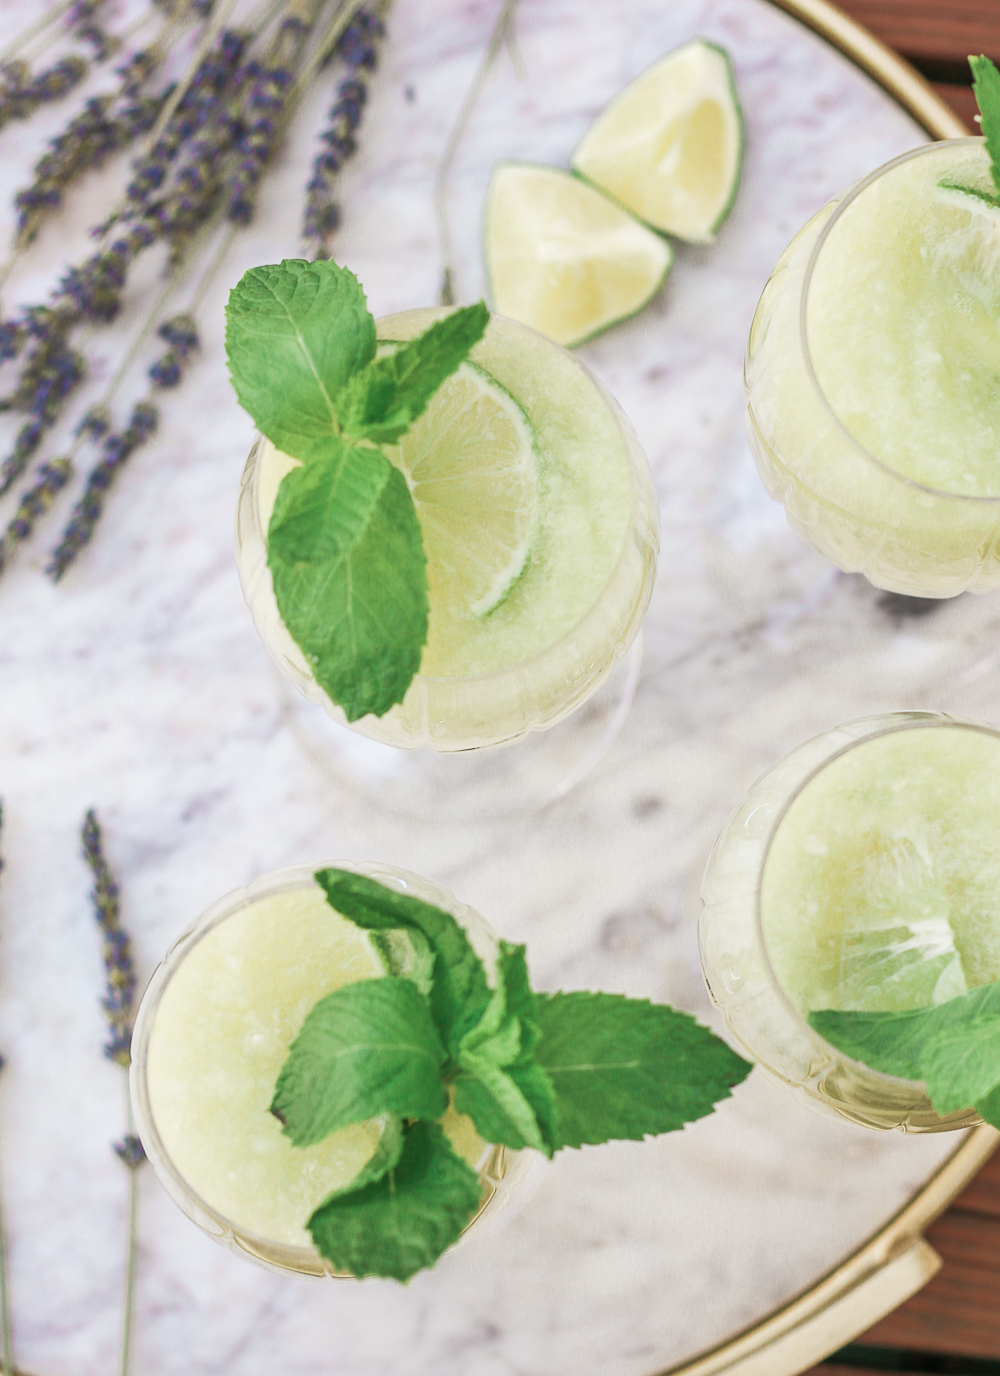 Cucumber Mocktail Recipe for Summer: Cucumber-Lime-Lavender Spritzer by southern lifestyle blogger Stephanie Ziajka from Diary of a Debutante, cucumber mocktail recipes, edible lavender cocktail recipe, Cooking Light mocktail recipes, summer mocktail ideas